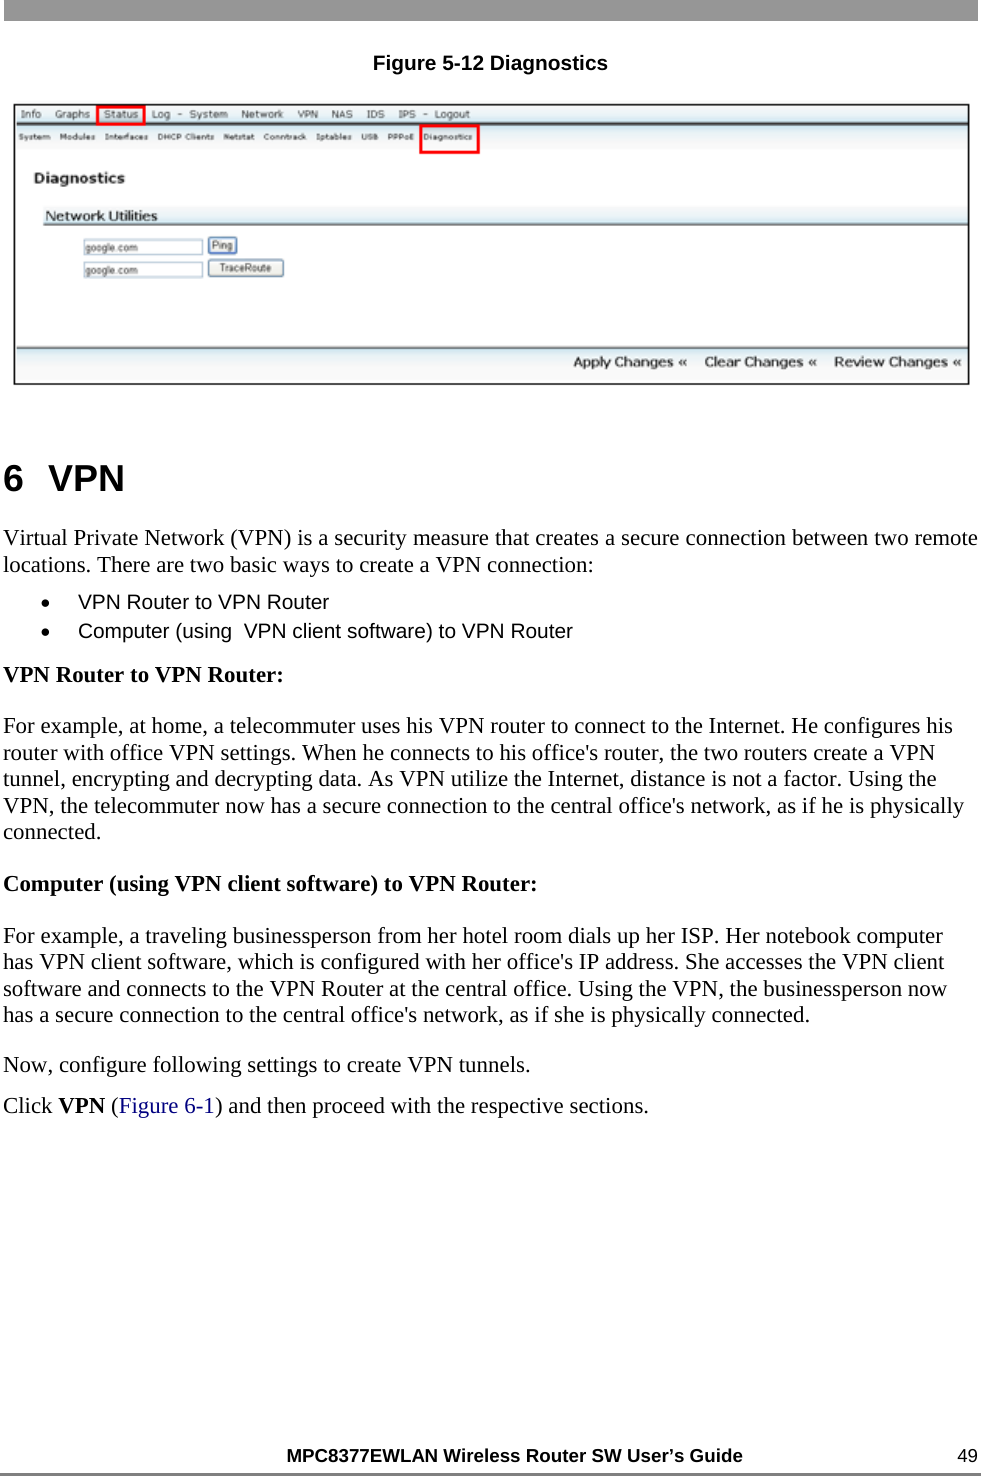                                                          MPC8377EWLAN Wireless Router SW User’s Guide    49 Figure 5-12 Diagnostics  6  VPN Virtual Private Network (VPN) is a security measure that creates a secure connection between two remote locations. There are two basic ways to create a VPN connection: •  VPN Router to VPN Router •  Computer (using  VPN client software) to VPN Router VPN Router to VPN Router:  For example, at home, a telecommuter uses his VPN router to connect to the Internet. He configures his router with office VPN settings. When he connects to his office&apos;s router, the two routers create a VPN tunnel, encrypting and decrypting data. As VPN utilize the Internet, distance is not a factor. Using the VPN, the telecommuter now has a secure connection to the central office&apos;s network, as if he is physically connected.  Computer (using VPN client software) to VPN Router: For example, a traveling businessperson from her hotel room dials up her ISP. Her notebook computer has VPN client software, which is configured with her office&apos;s IP address. She accesses the VPN client software and connects to the VPN Router at the central office. Using the VPN, the businessperson now has a secure connection to the central office&apos;s network, as if she is physically connected. Now, configure following settings to create VPN tunnels. Click VPN (Figure 6-1) and then proceed with the respective sections.  